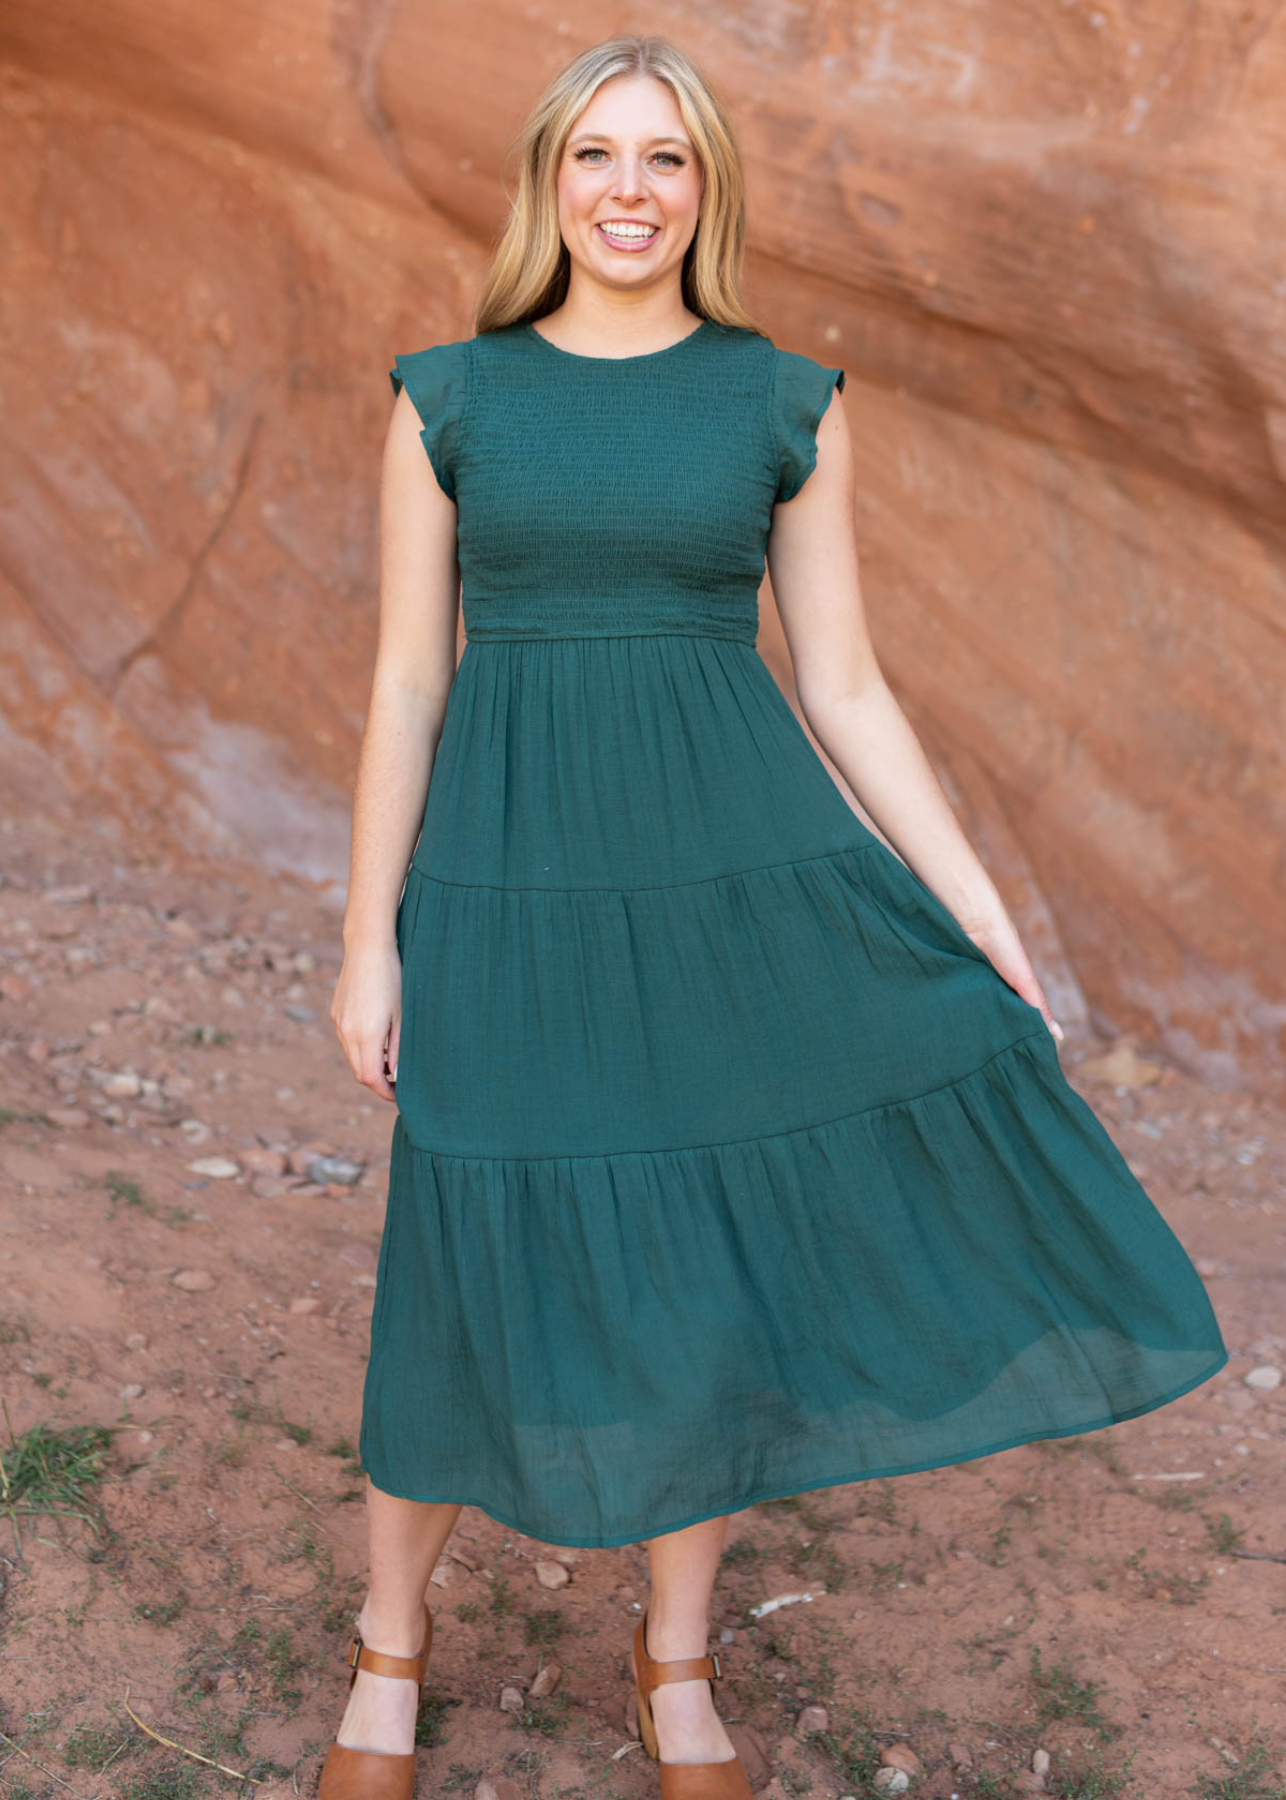 Hunter green dress with tiered skirt